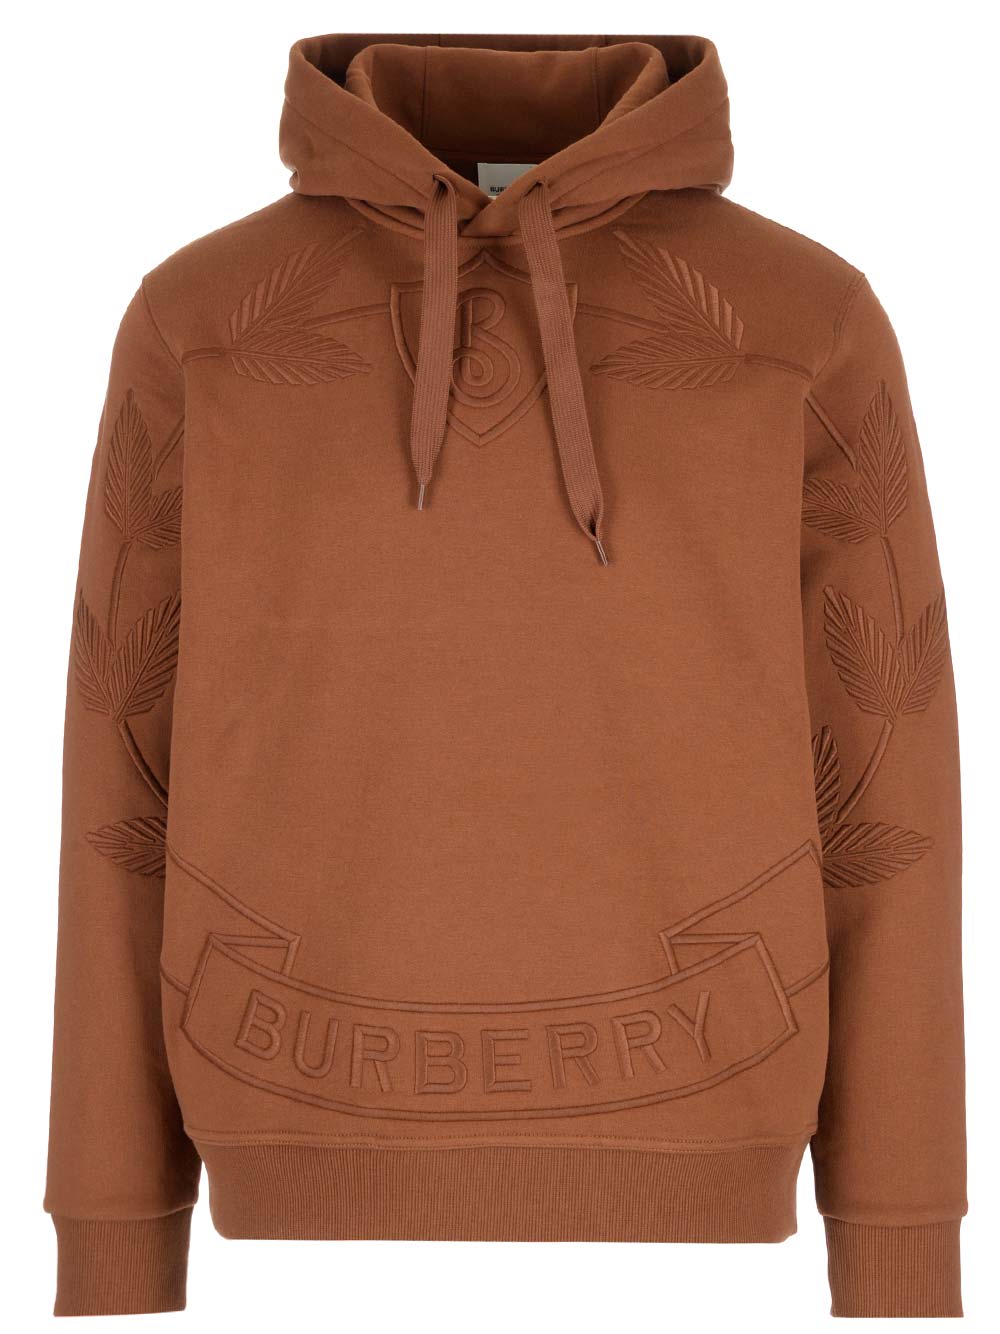 BURBERRY BROWN HOODIE WITH EMBROIDERED LOGO